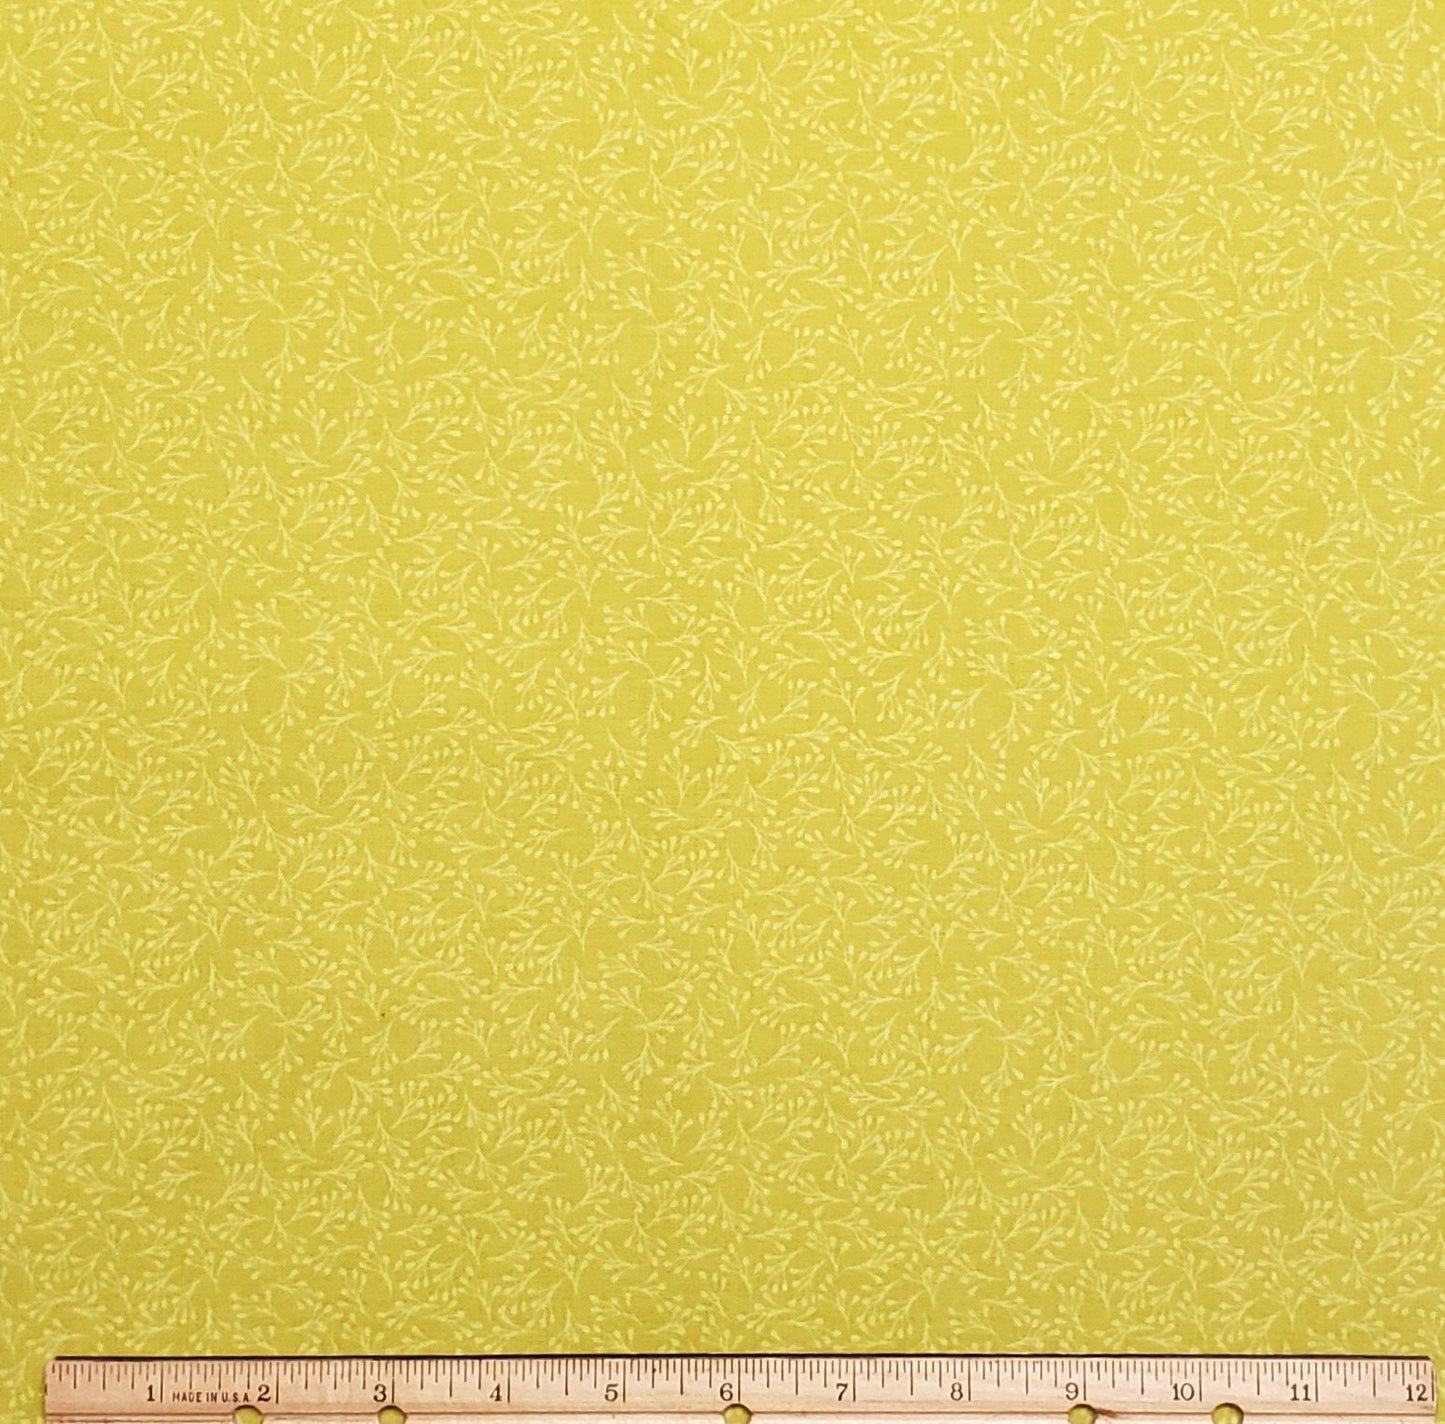 Chartreuse Tonal Print Fabric - Selvage to Selvage Print